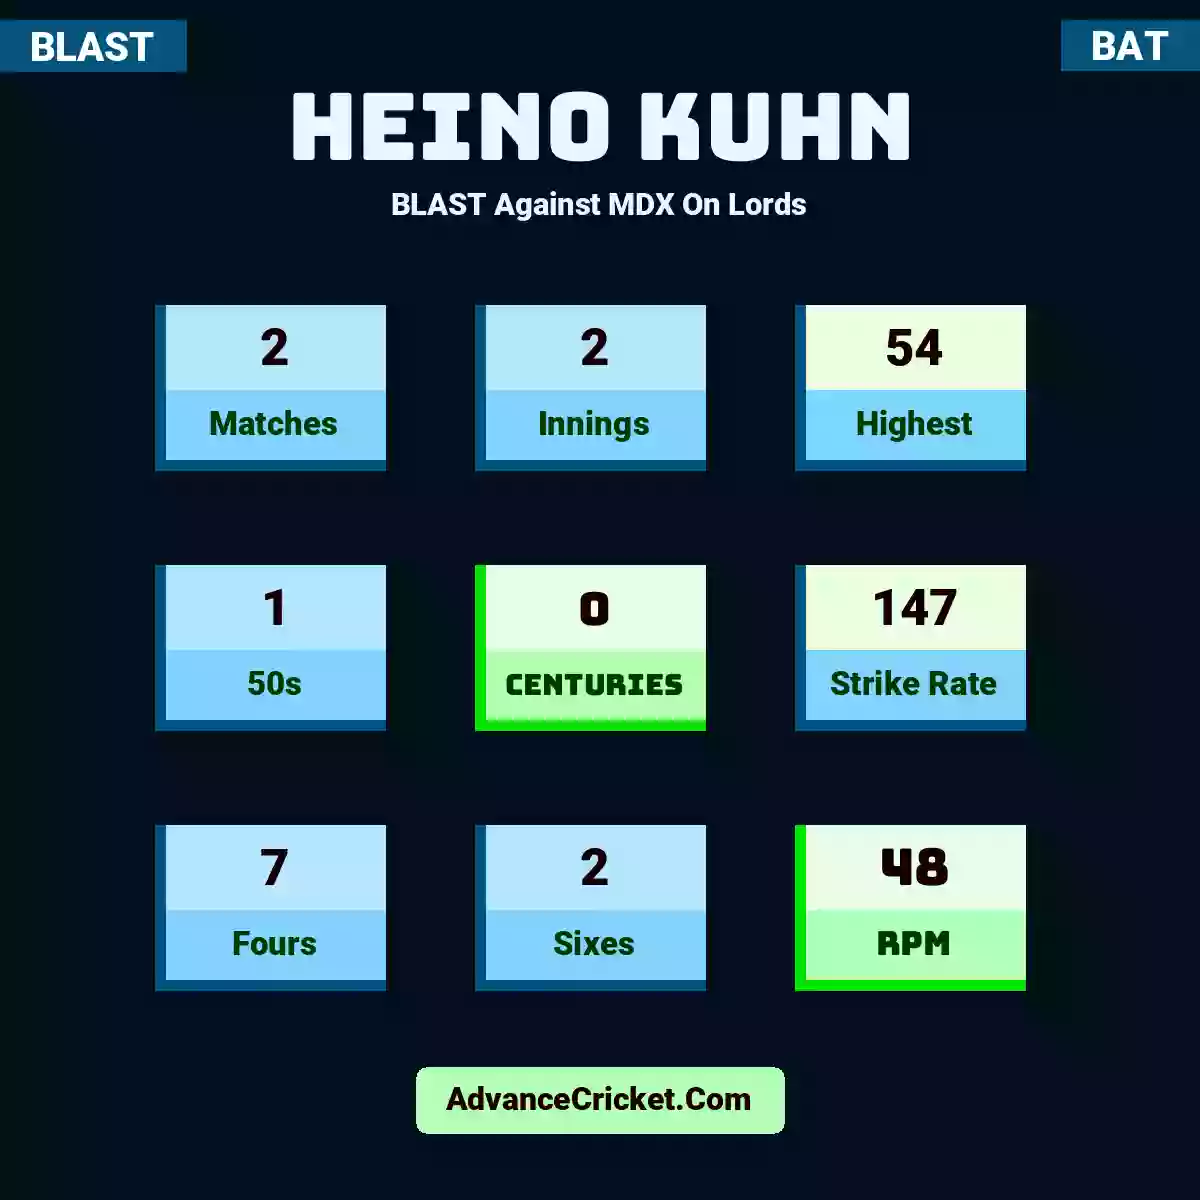 Heino Kuhn BLAST  Against MDX On Lords, Heino Kuhn played 2 matches, scored 54 runs as highest, 1 half-centuries, and 0 centuries, with a strike rate of 147. H.Kuhn hit 7 fours and 2 sixes, with an RPM of 48.